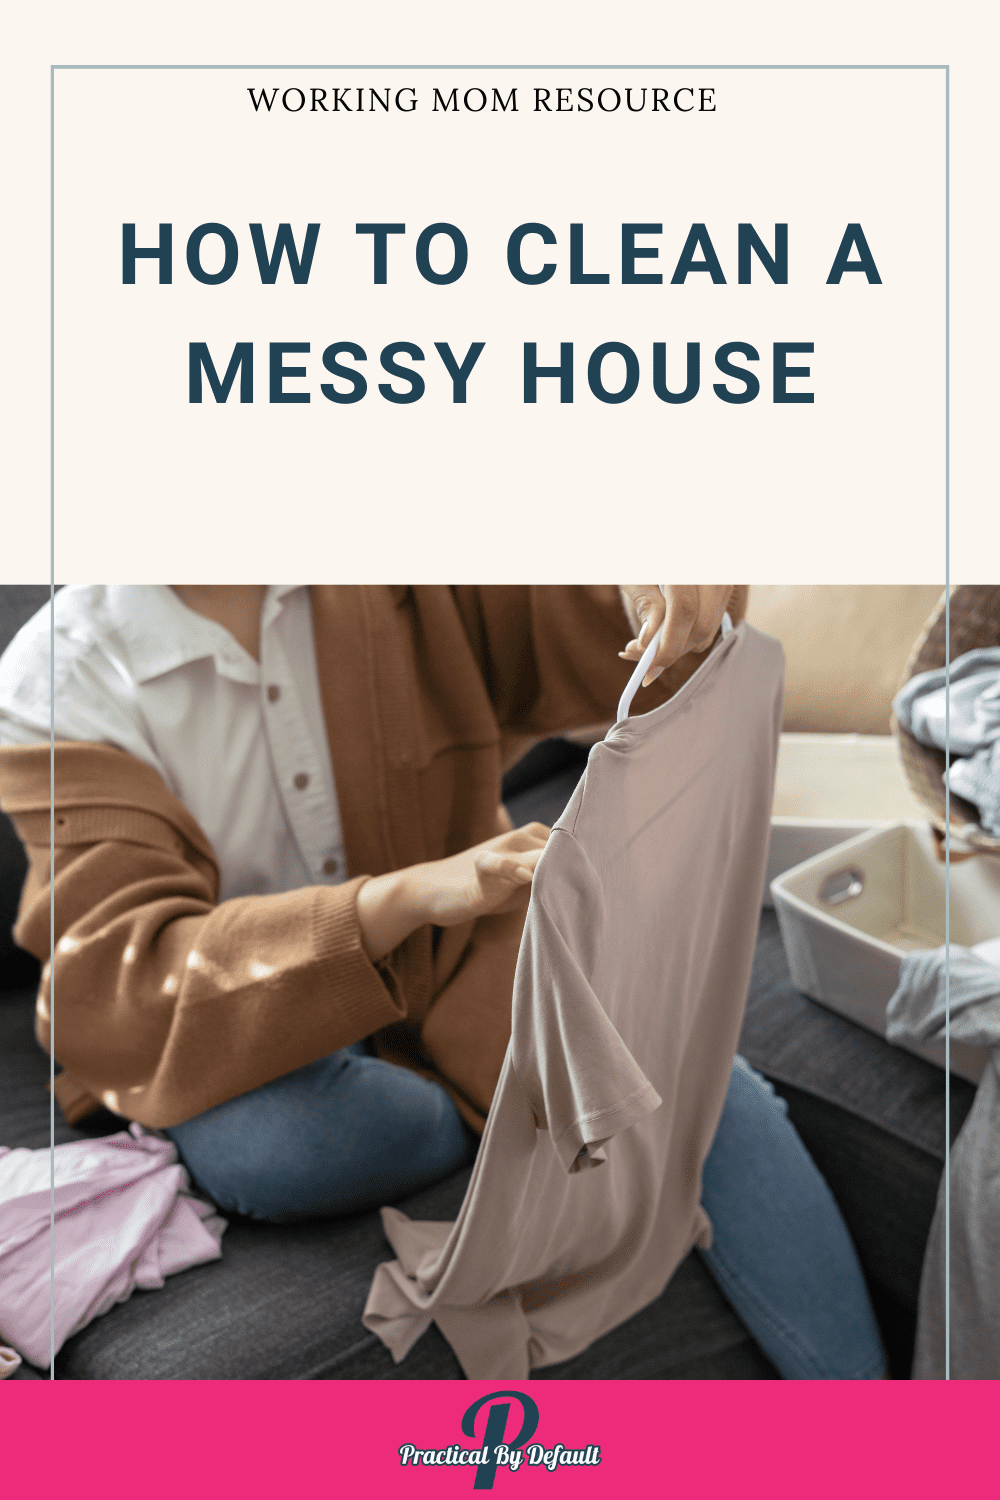 How To Clean A Messy House